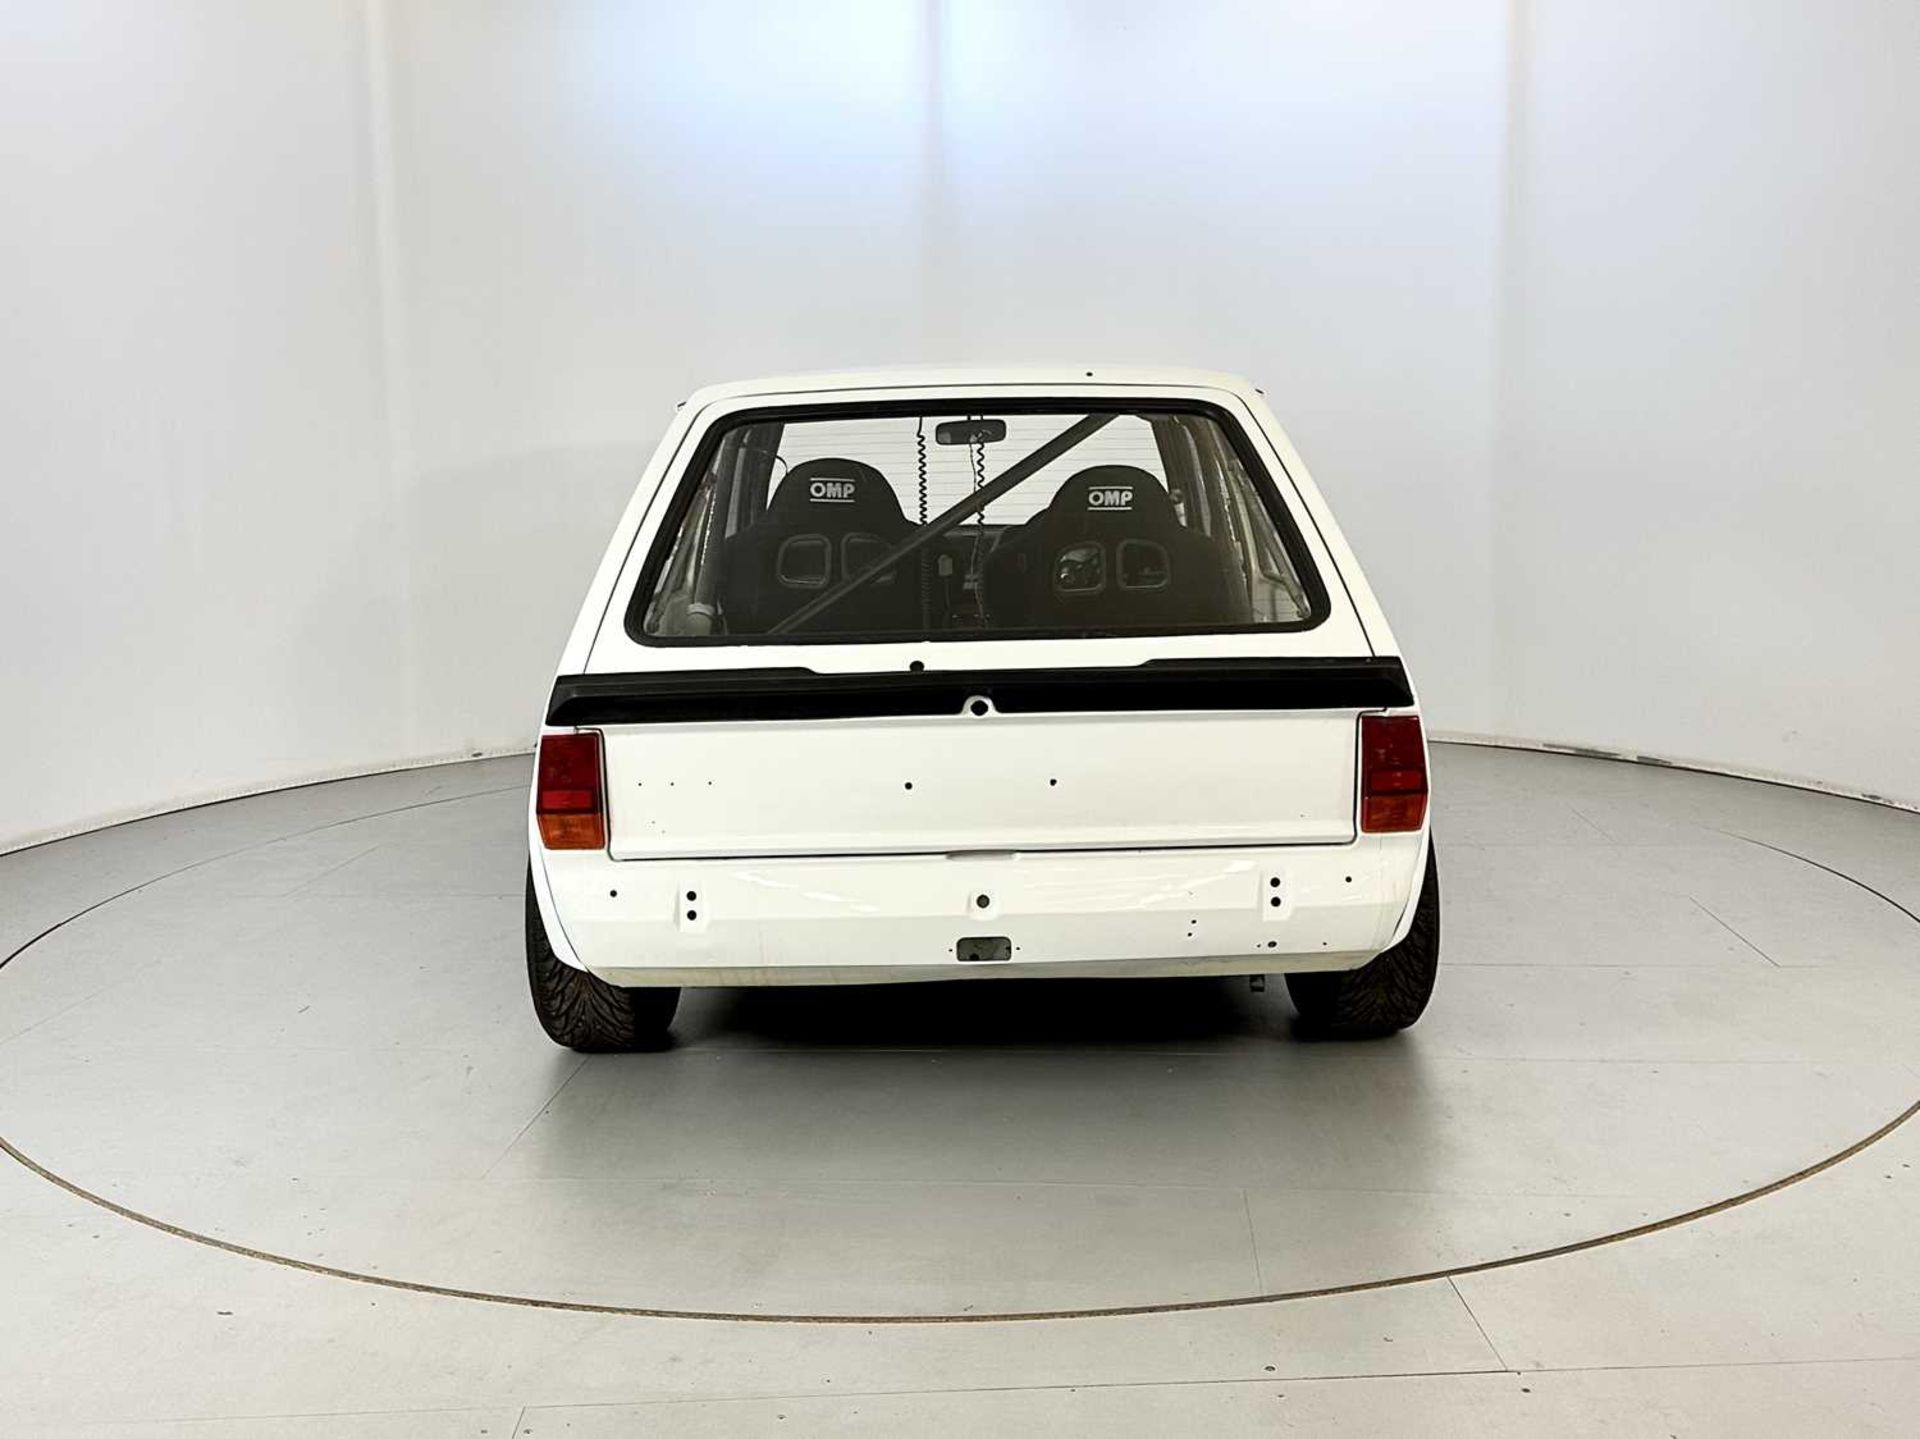 1983 Ford Fiesta XR2 - Image 8 of 28